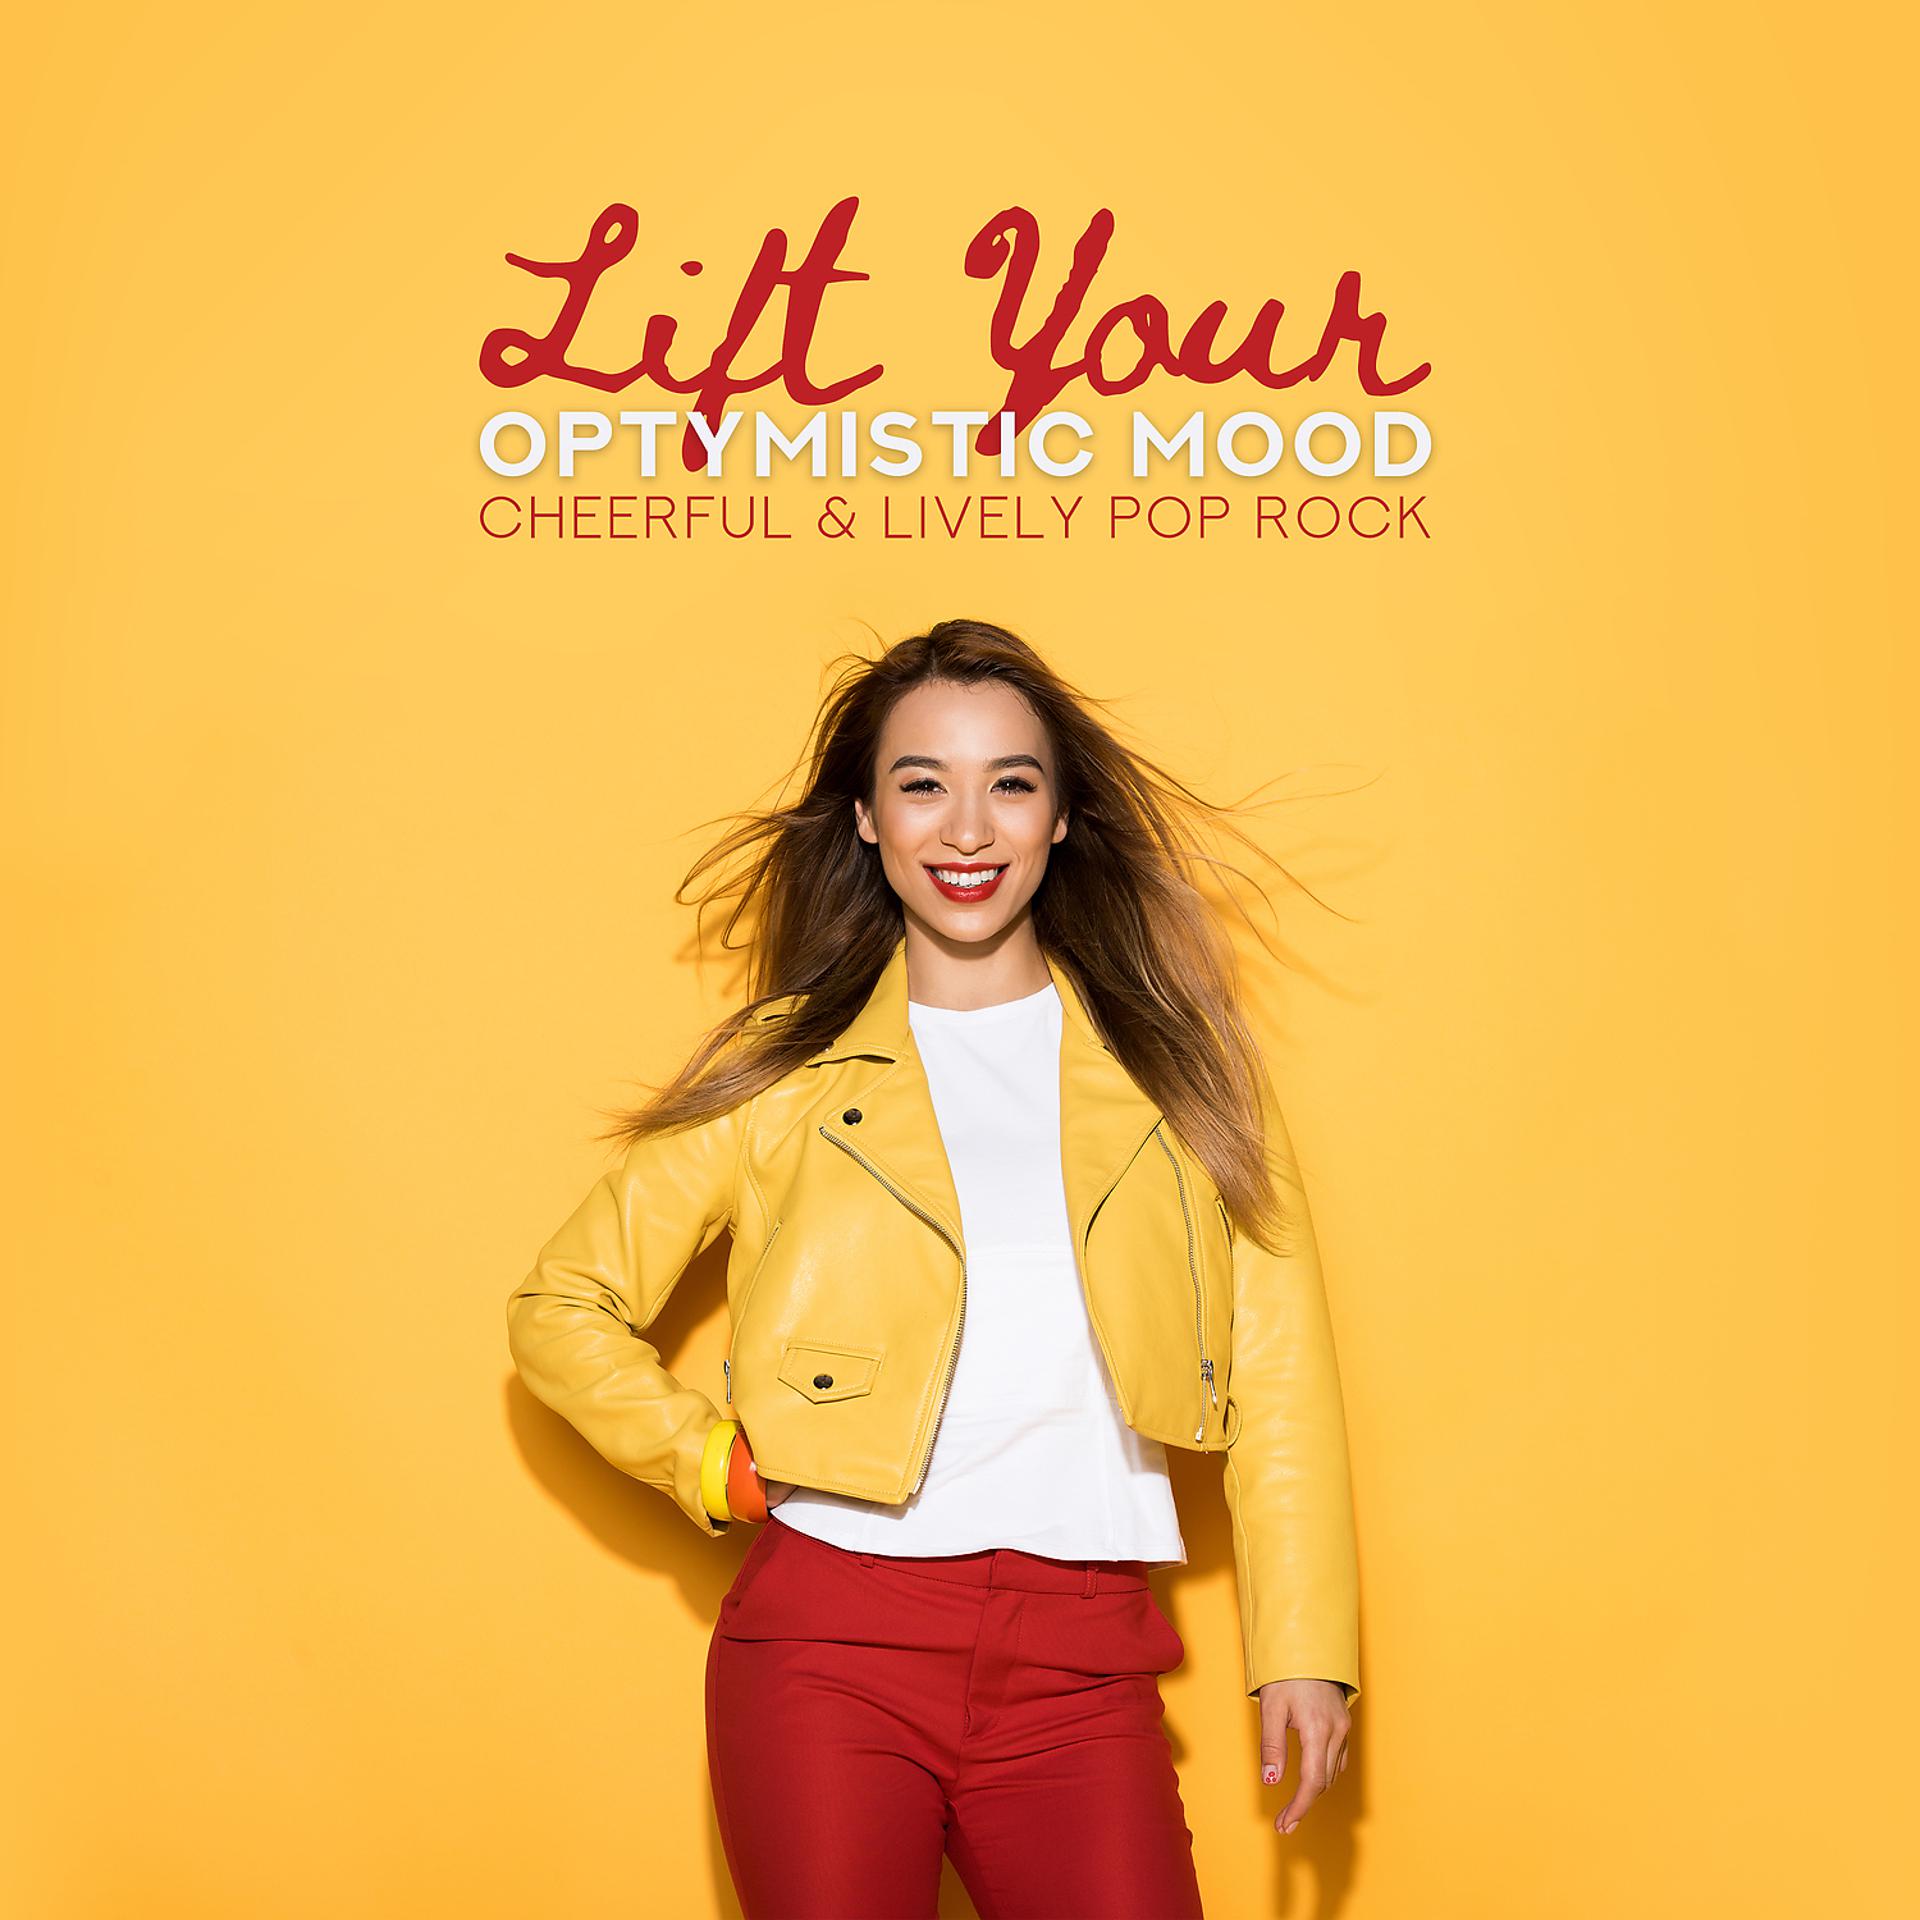 Постер альбома Lift Your Optymistic Mood: Cheerful & Lively Pop Rock, Working, Studying, Reading, Listening, Happy and Upbeat